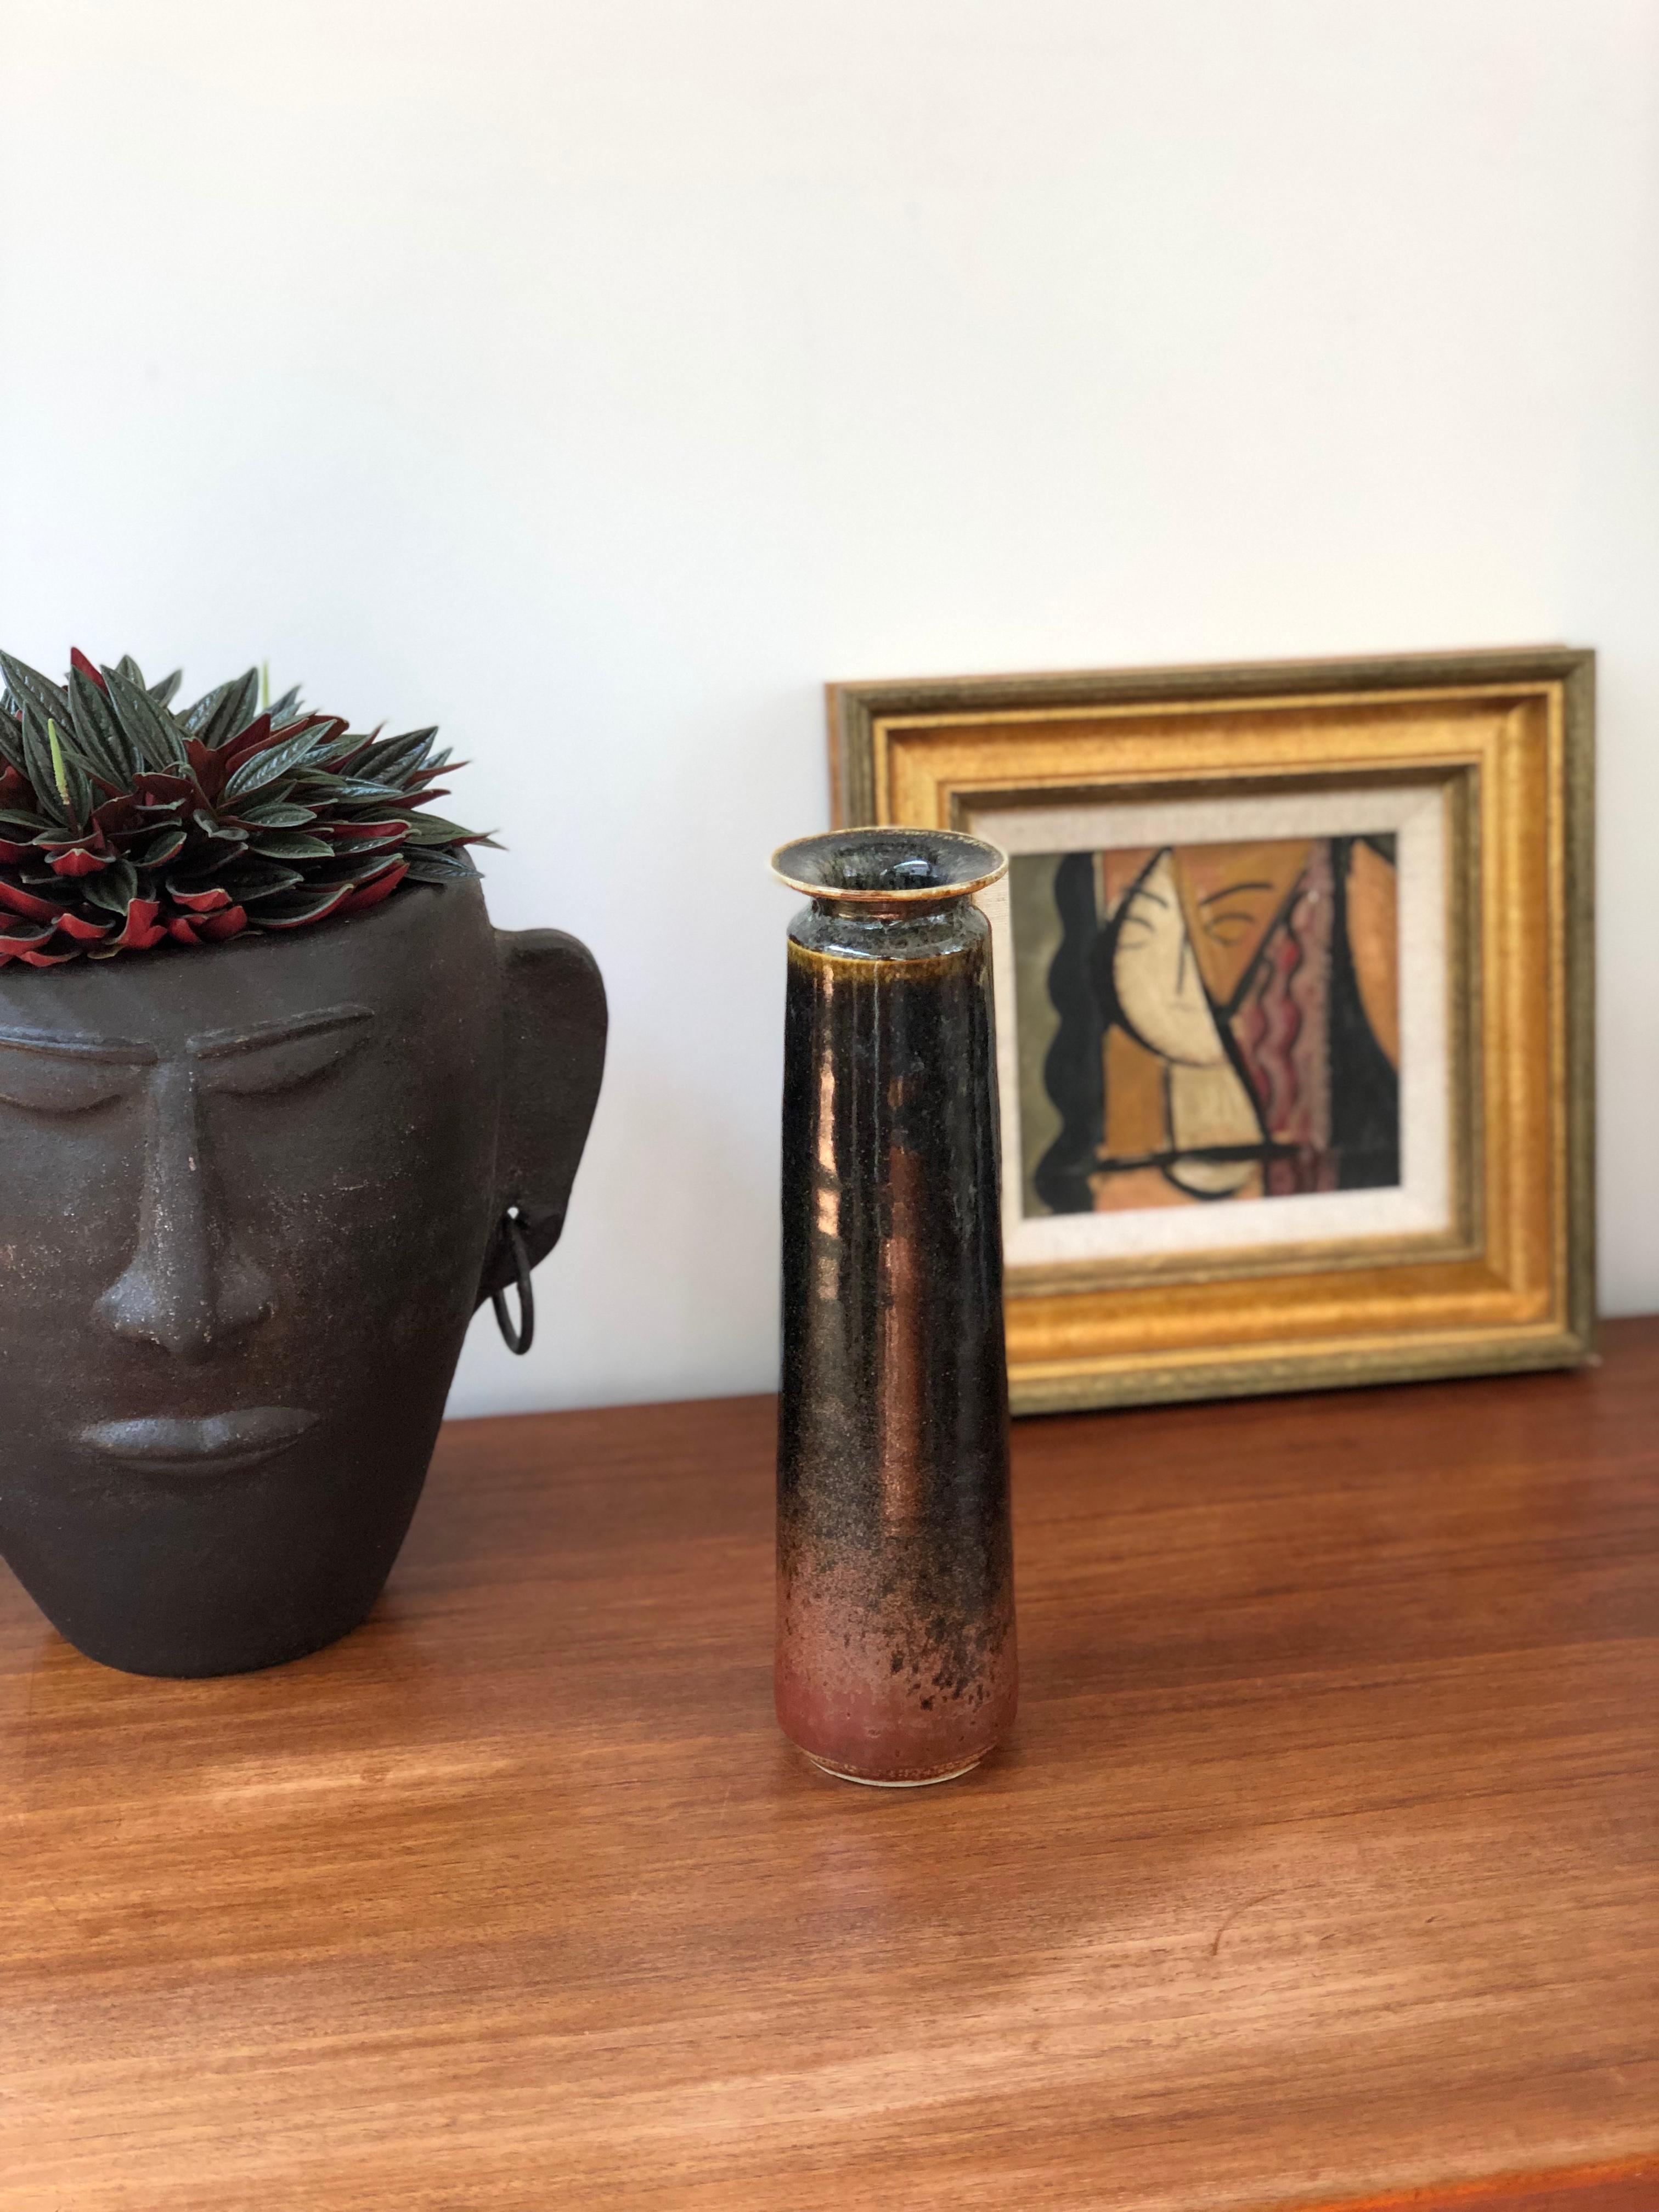 Decorative elongated ceramic flower vase (circa 1960s). This mid-century flower vase is cylindrical in shape and stylishly glazed with a sheen in a dark brown interrupted with lighter highlights and much lighter coloring near the base. At the top,